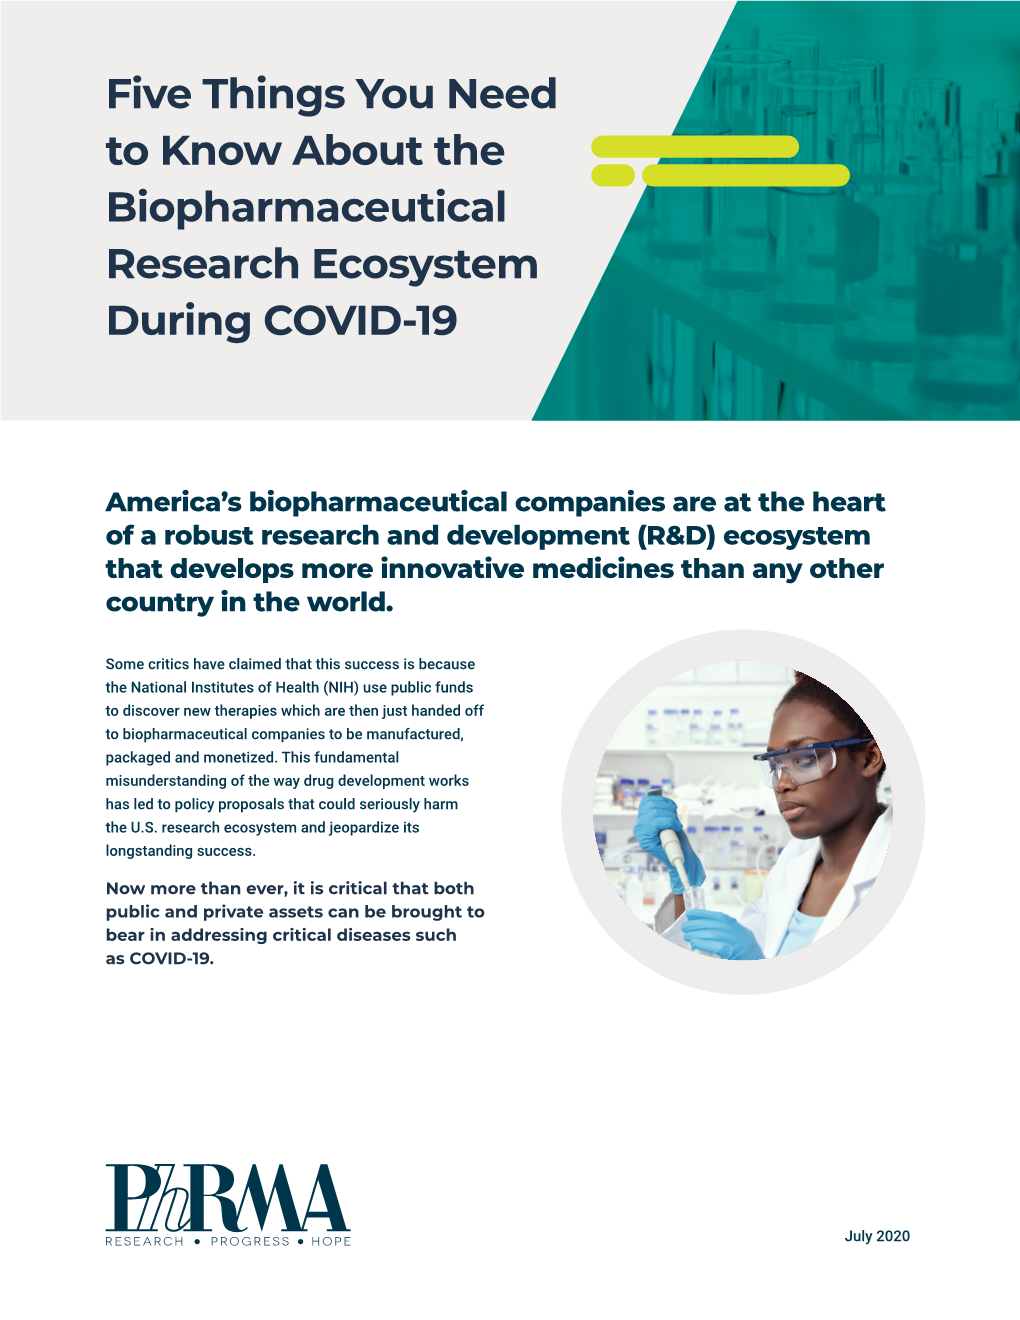 Five Things You Need to Know About the Biopharmaceutical Research Ecosystem During COVID-19